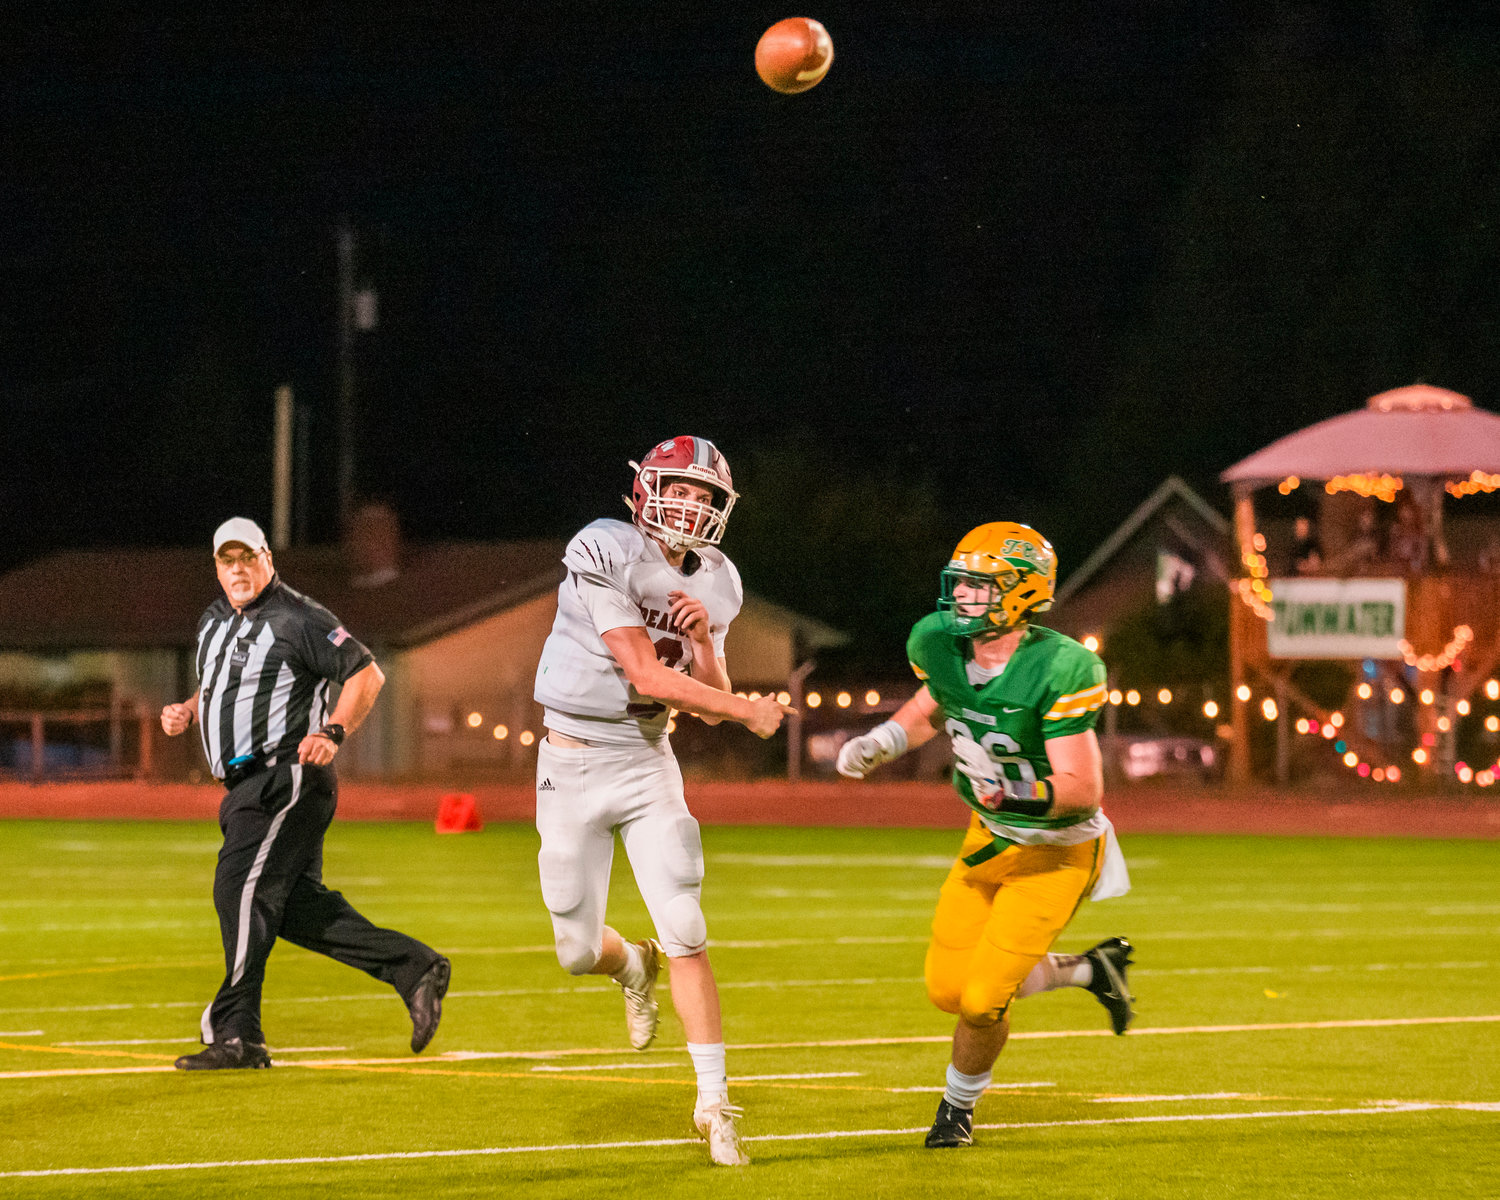 W.F. West’s quarterback Gavin Fugate (9) throws a pass during a game against Tumwater Friday night.